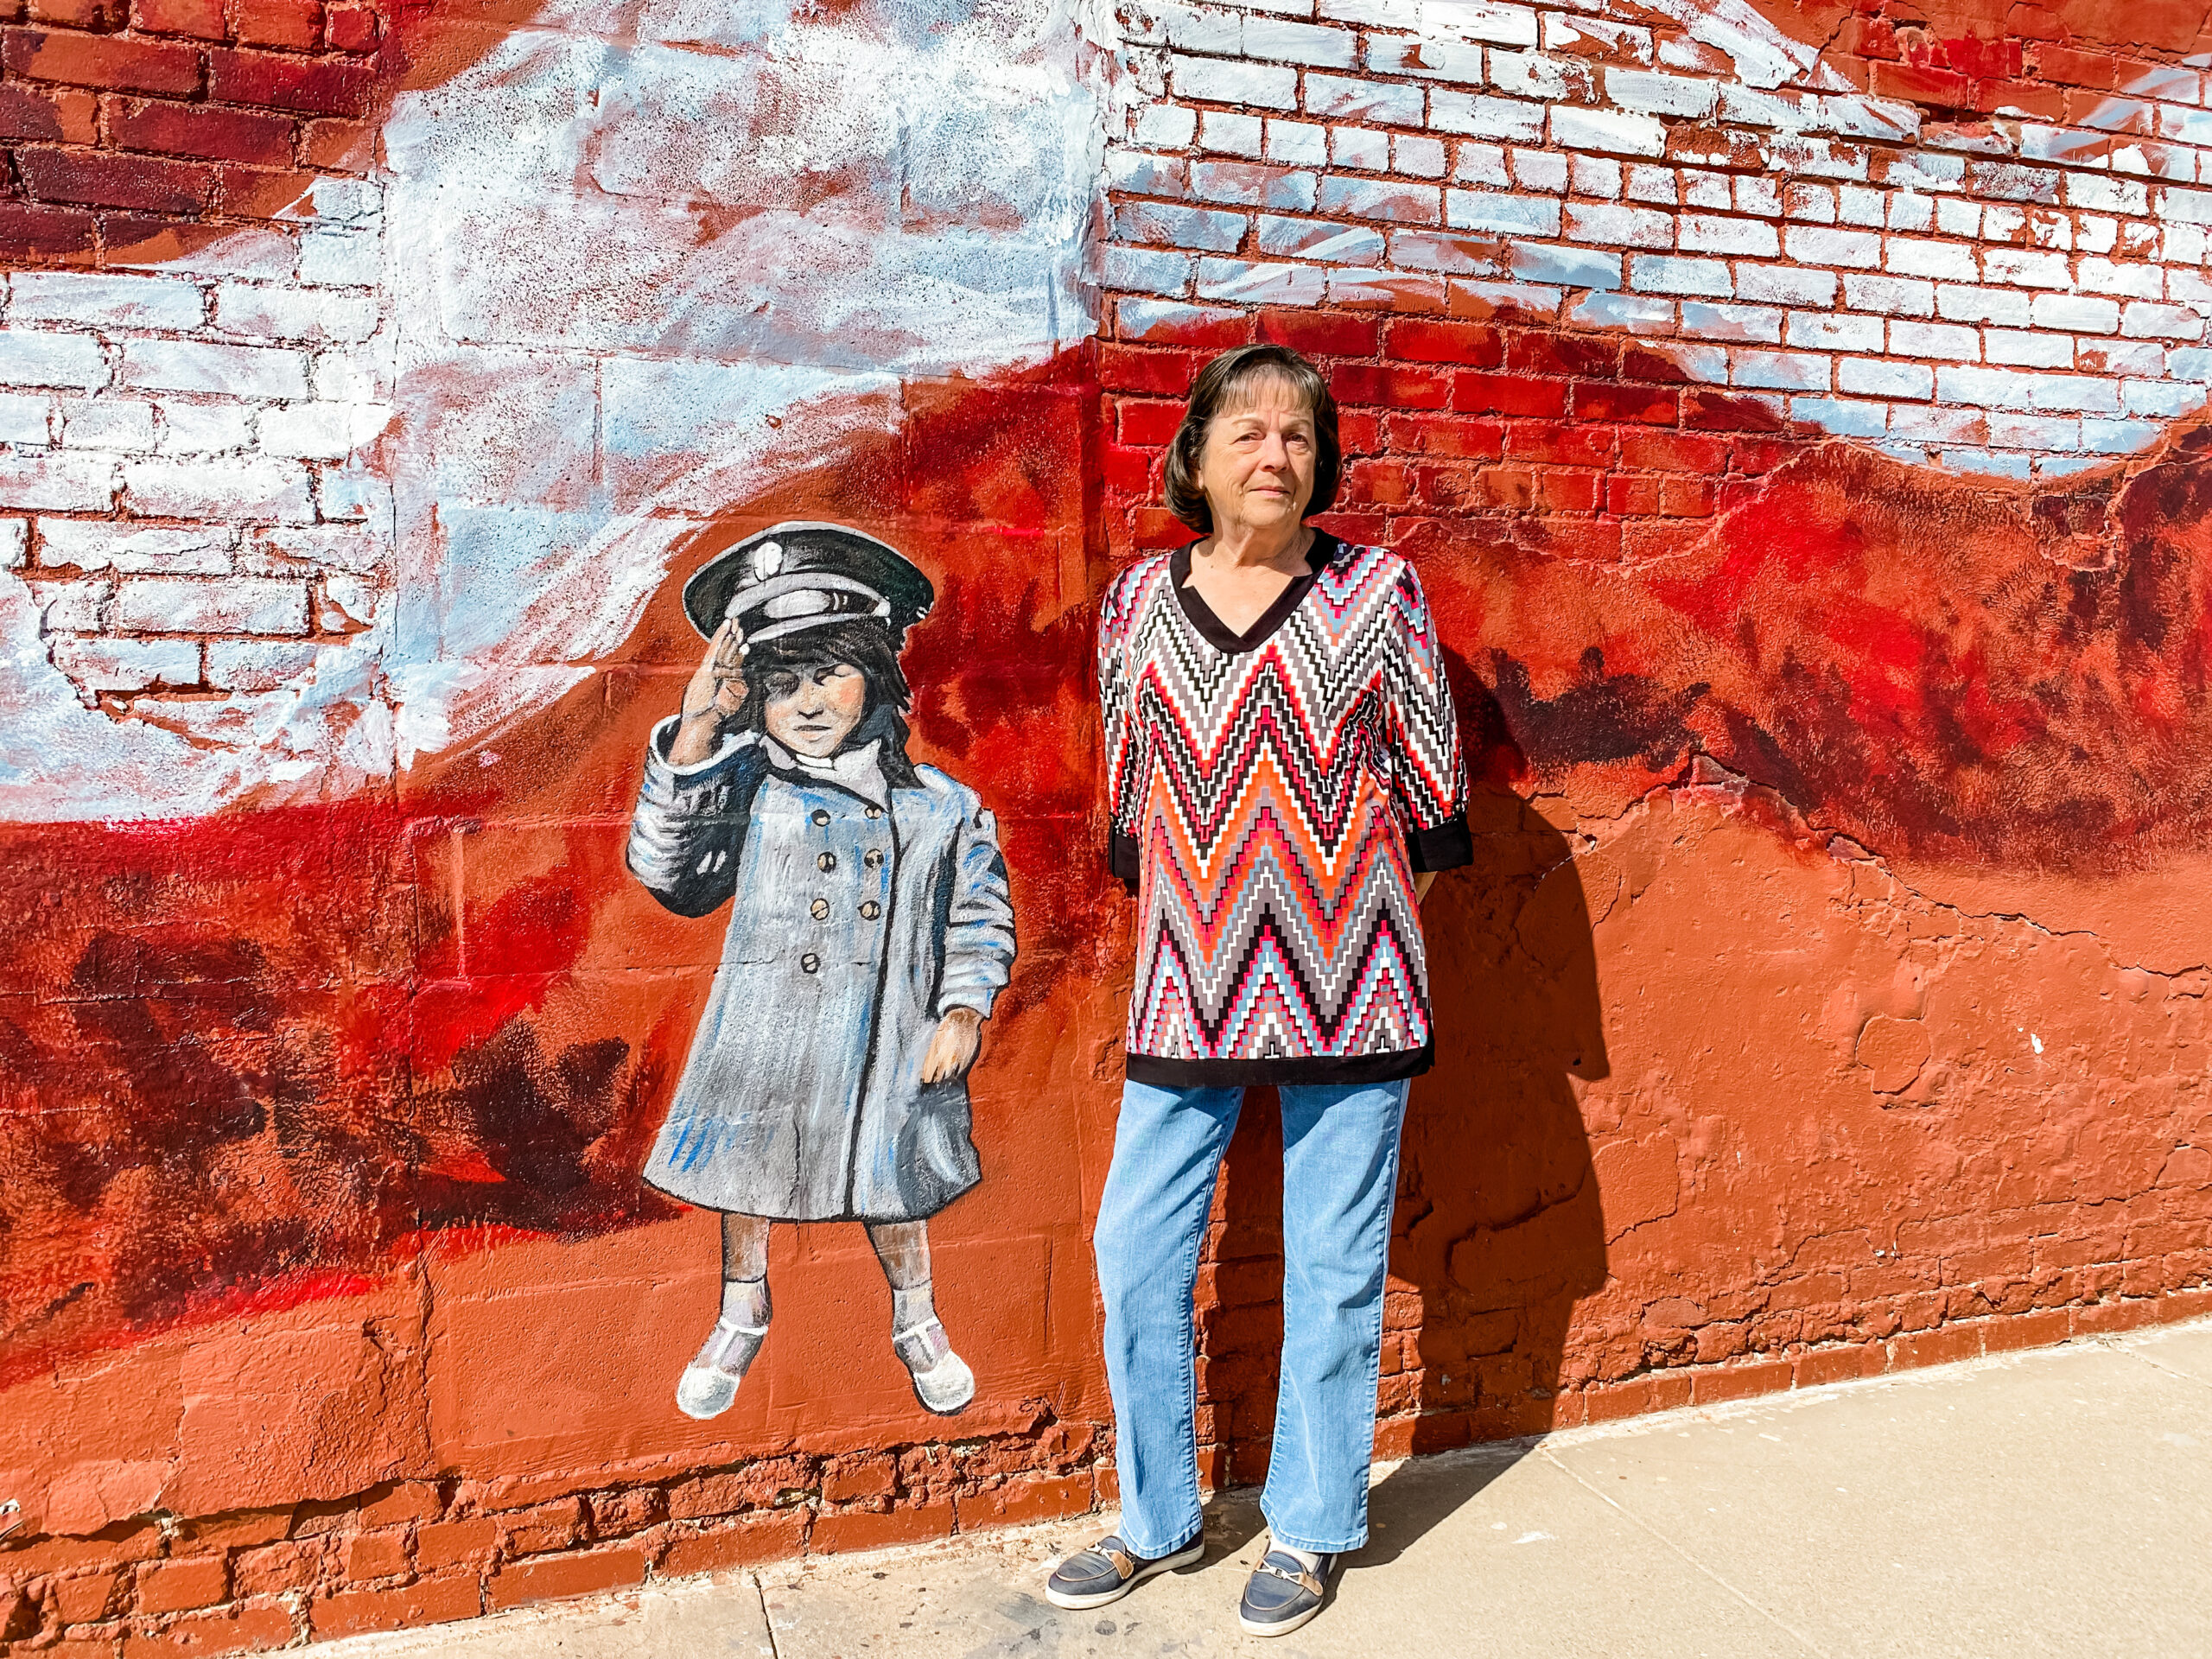 Shirley Mixon posing in front of the saluting girl murals as part of The Murals at 76067.